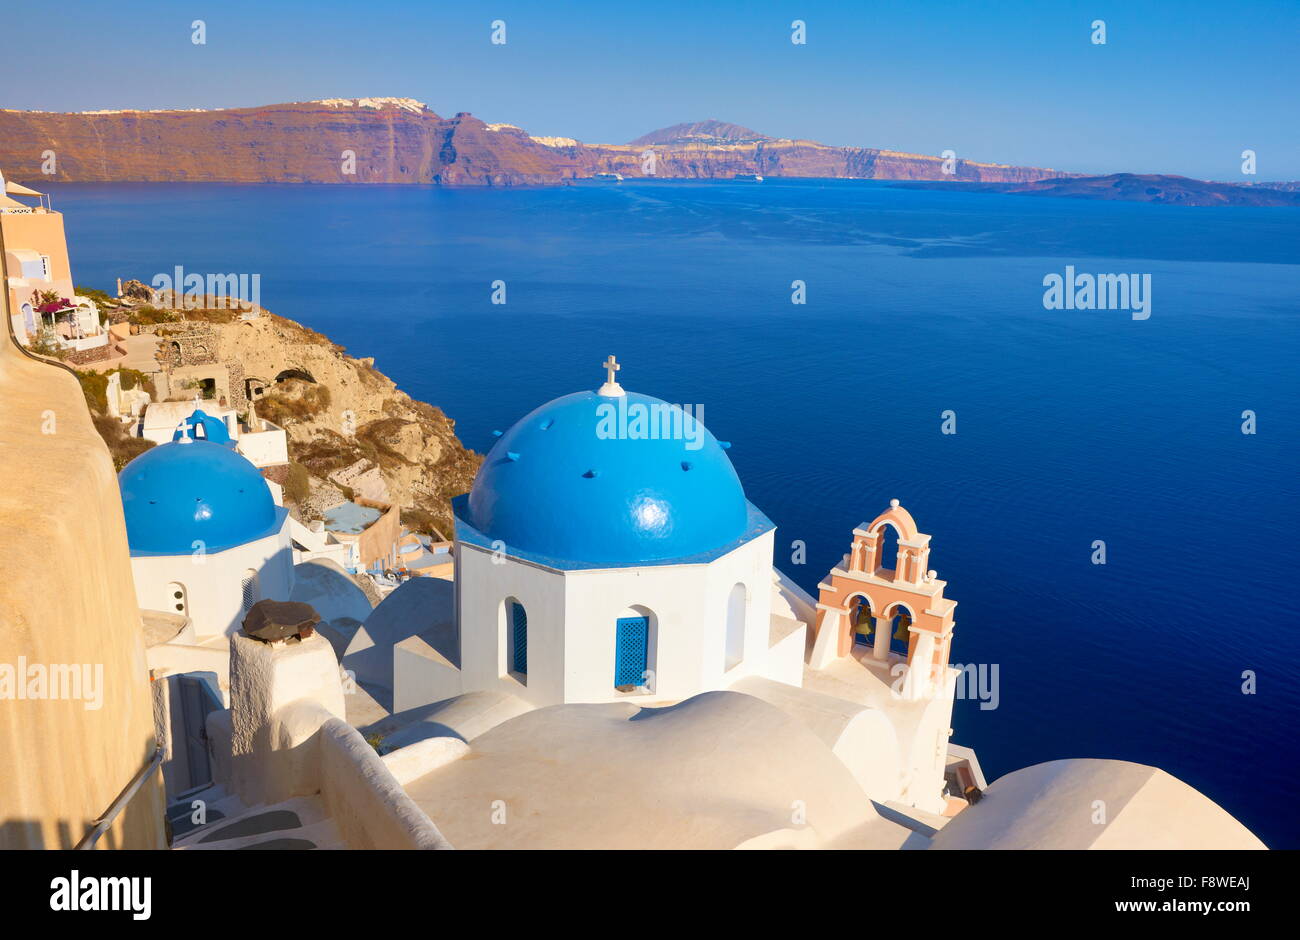 Santorini landscape with greek white church, bell tower and Aegean Sea in the background, Oia Town, Santorini Island, Greece Stock Photo